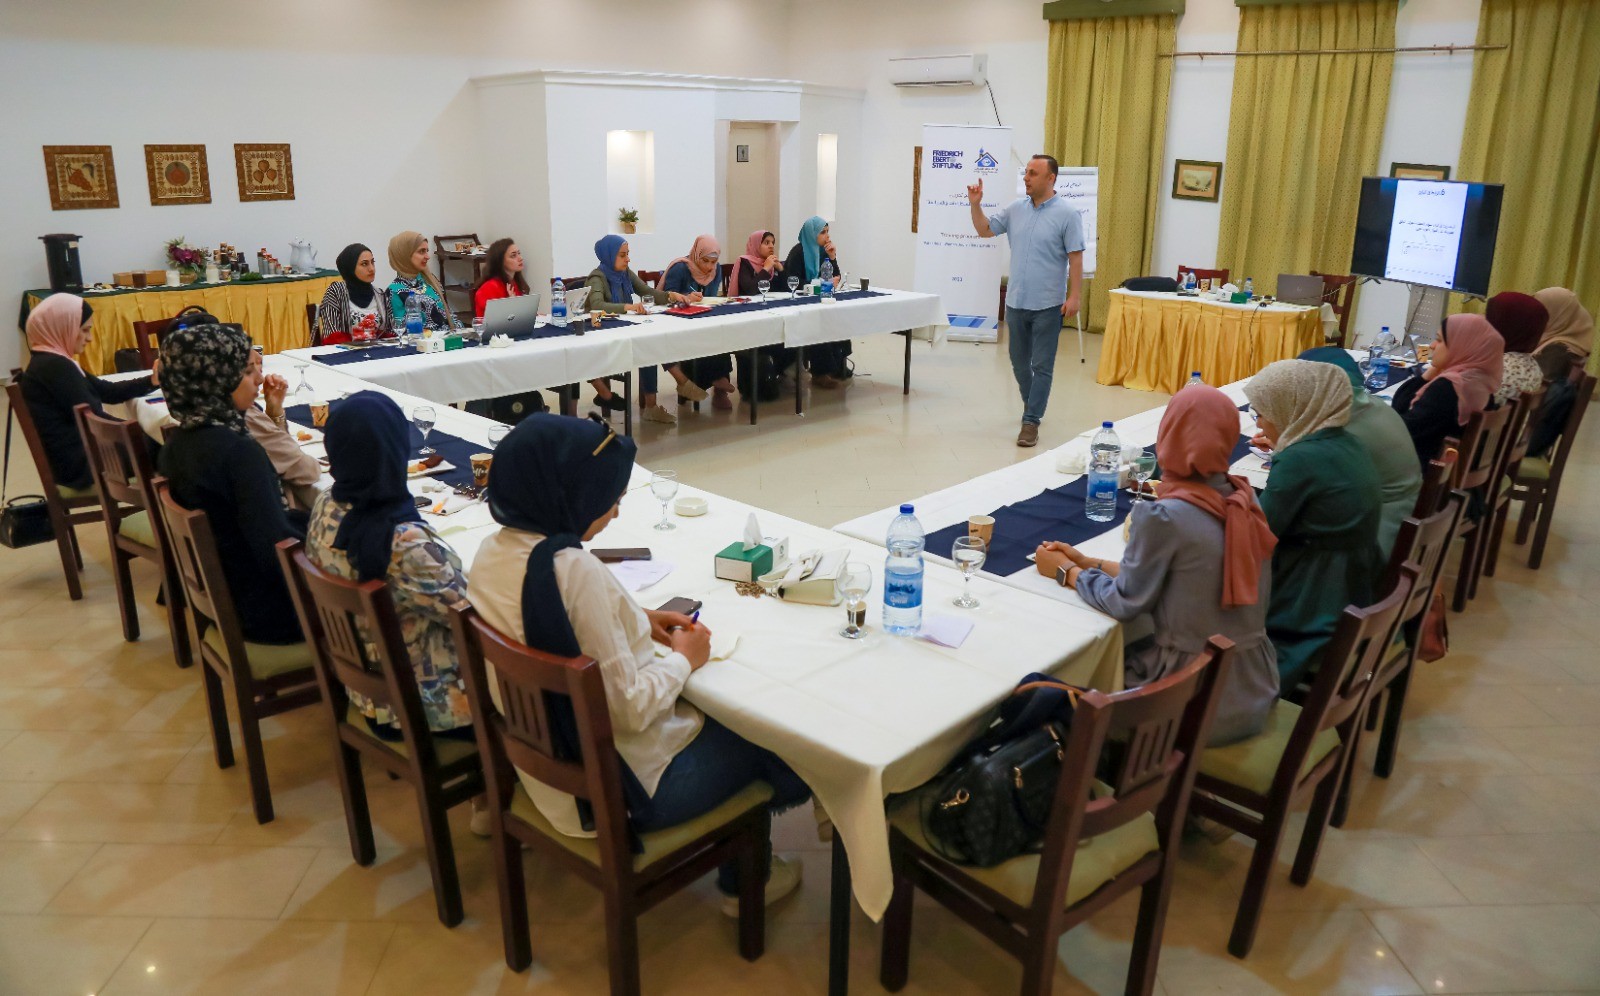 Press House concludes the "Traditional & Digital Media" Training